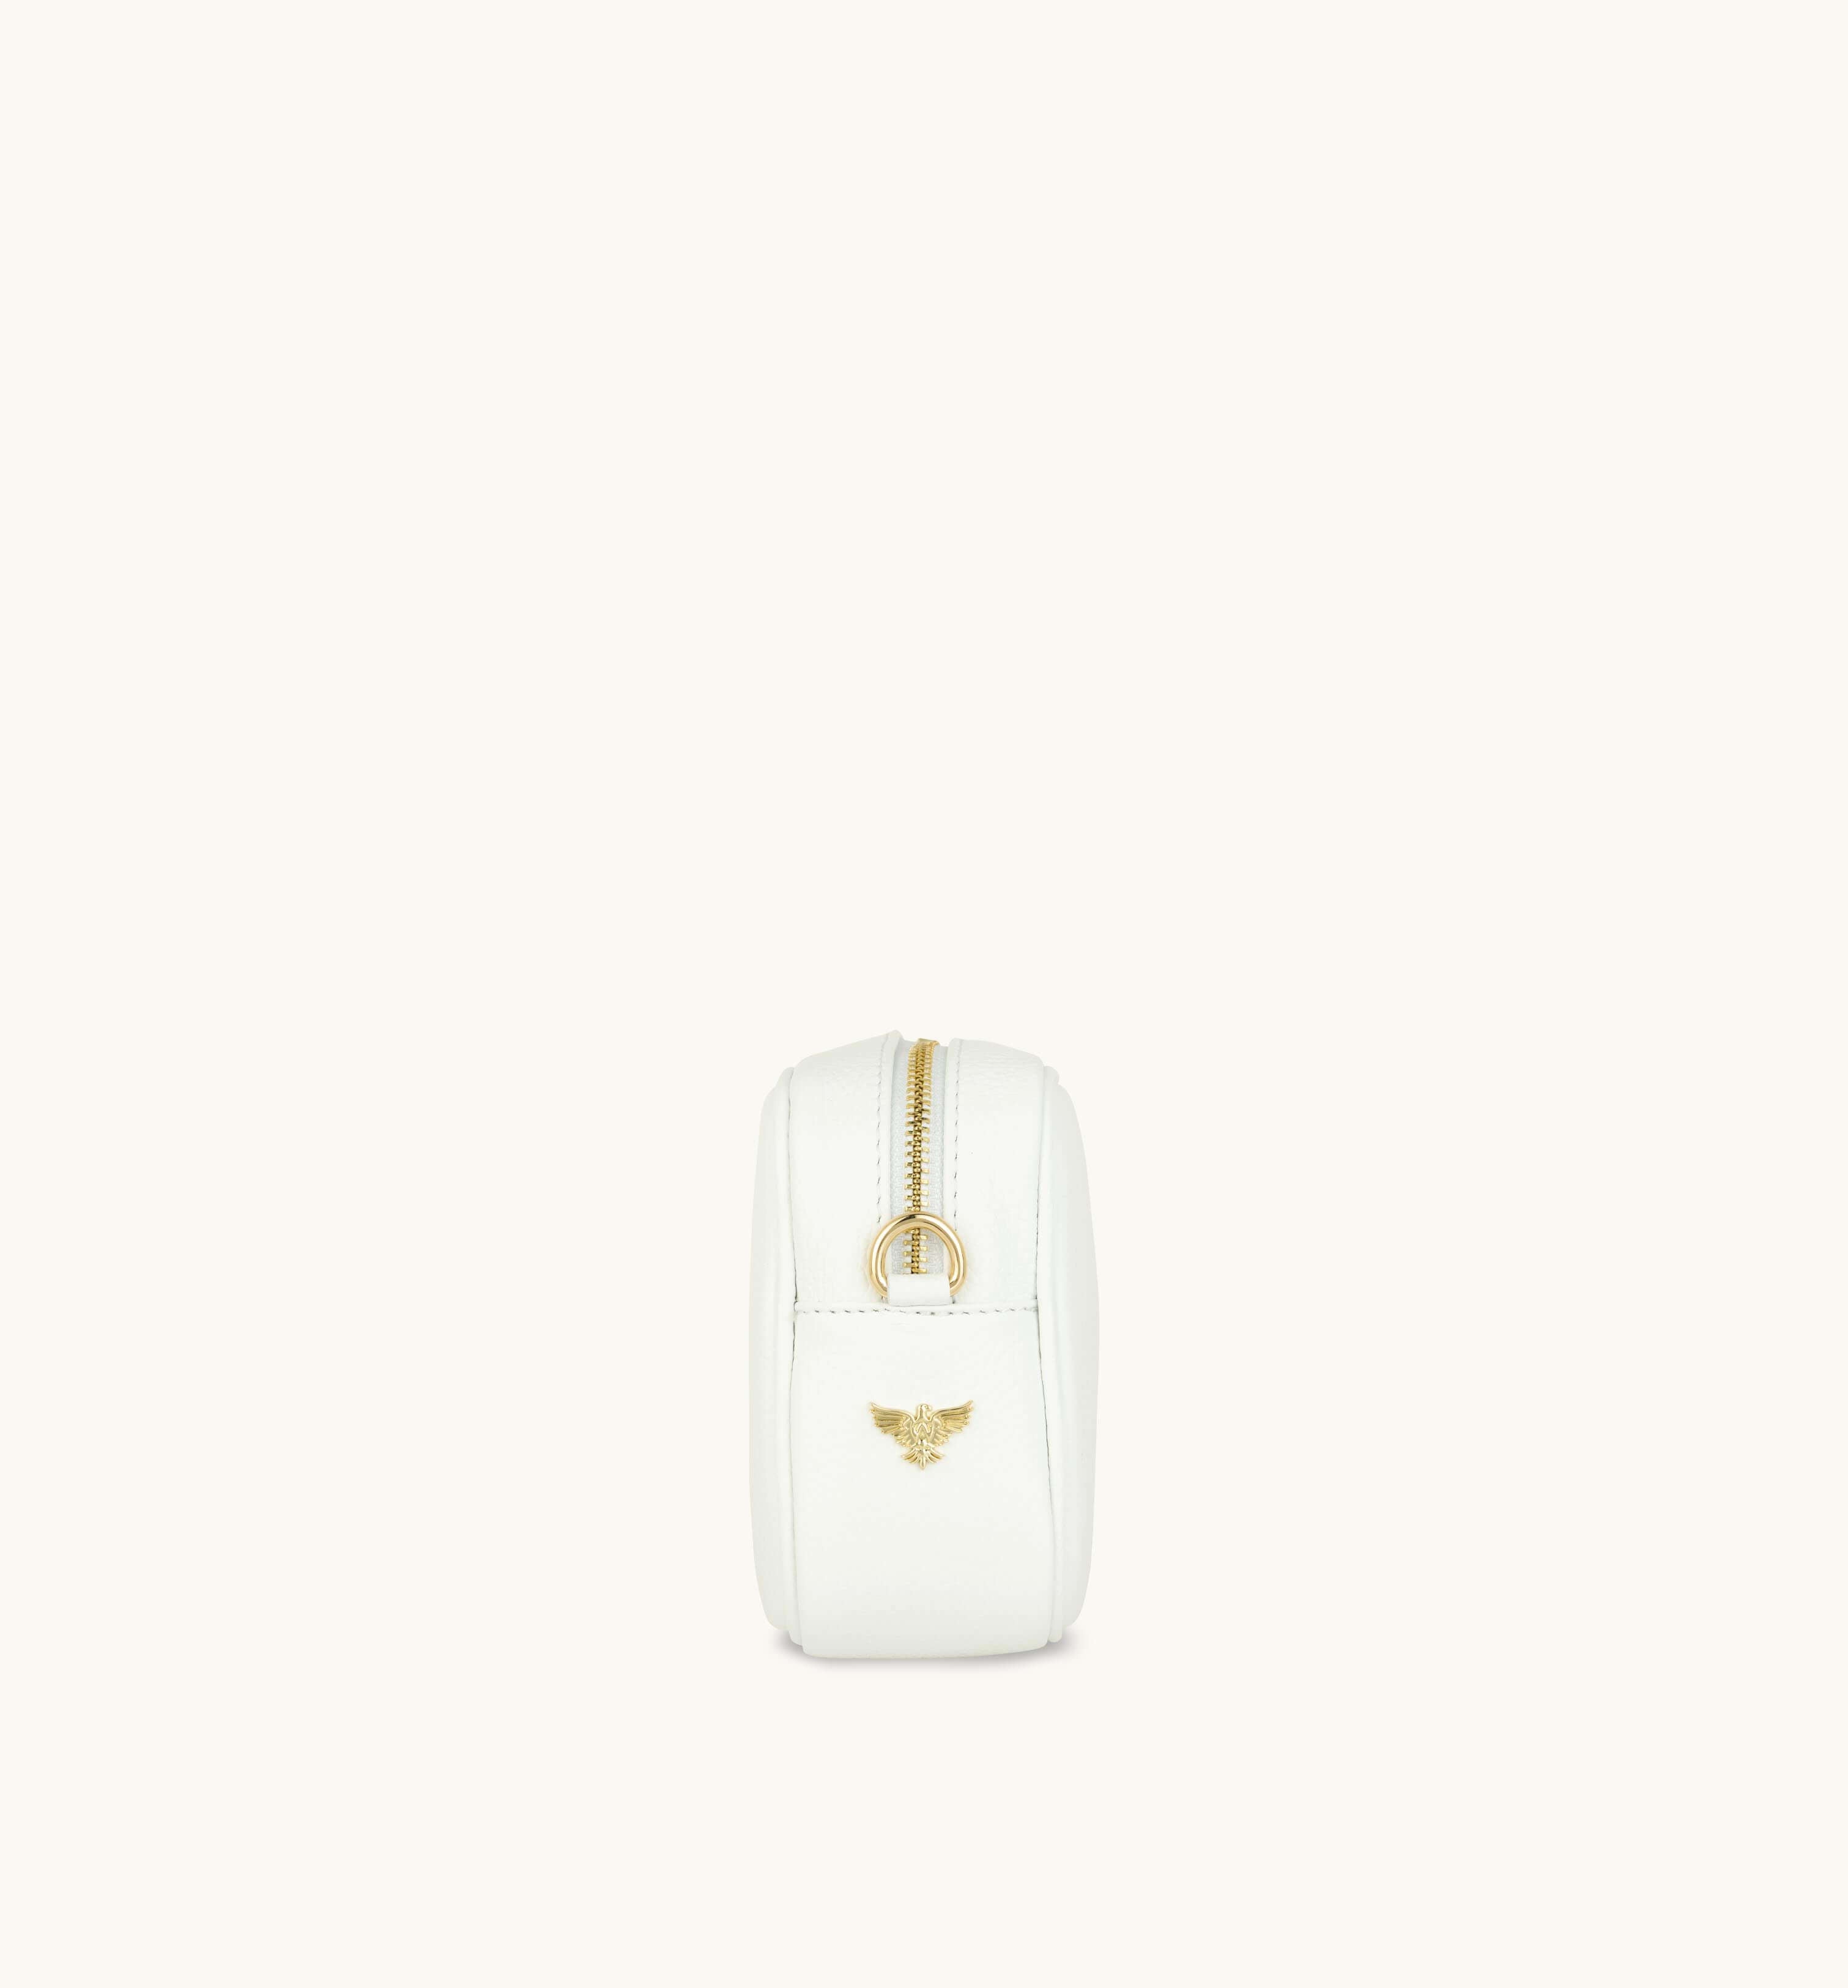 The Tassel White Leather Crossbody Bag With Gold Chain Strap